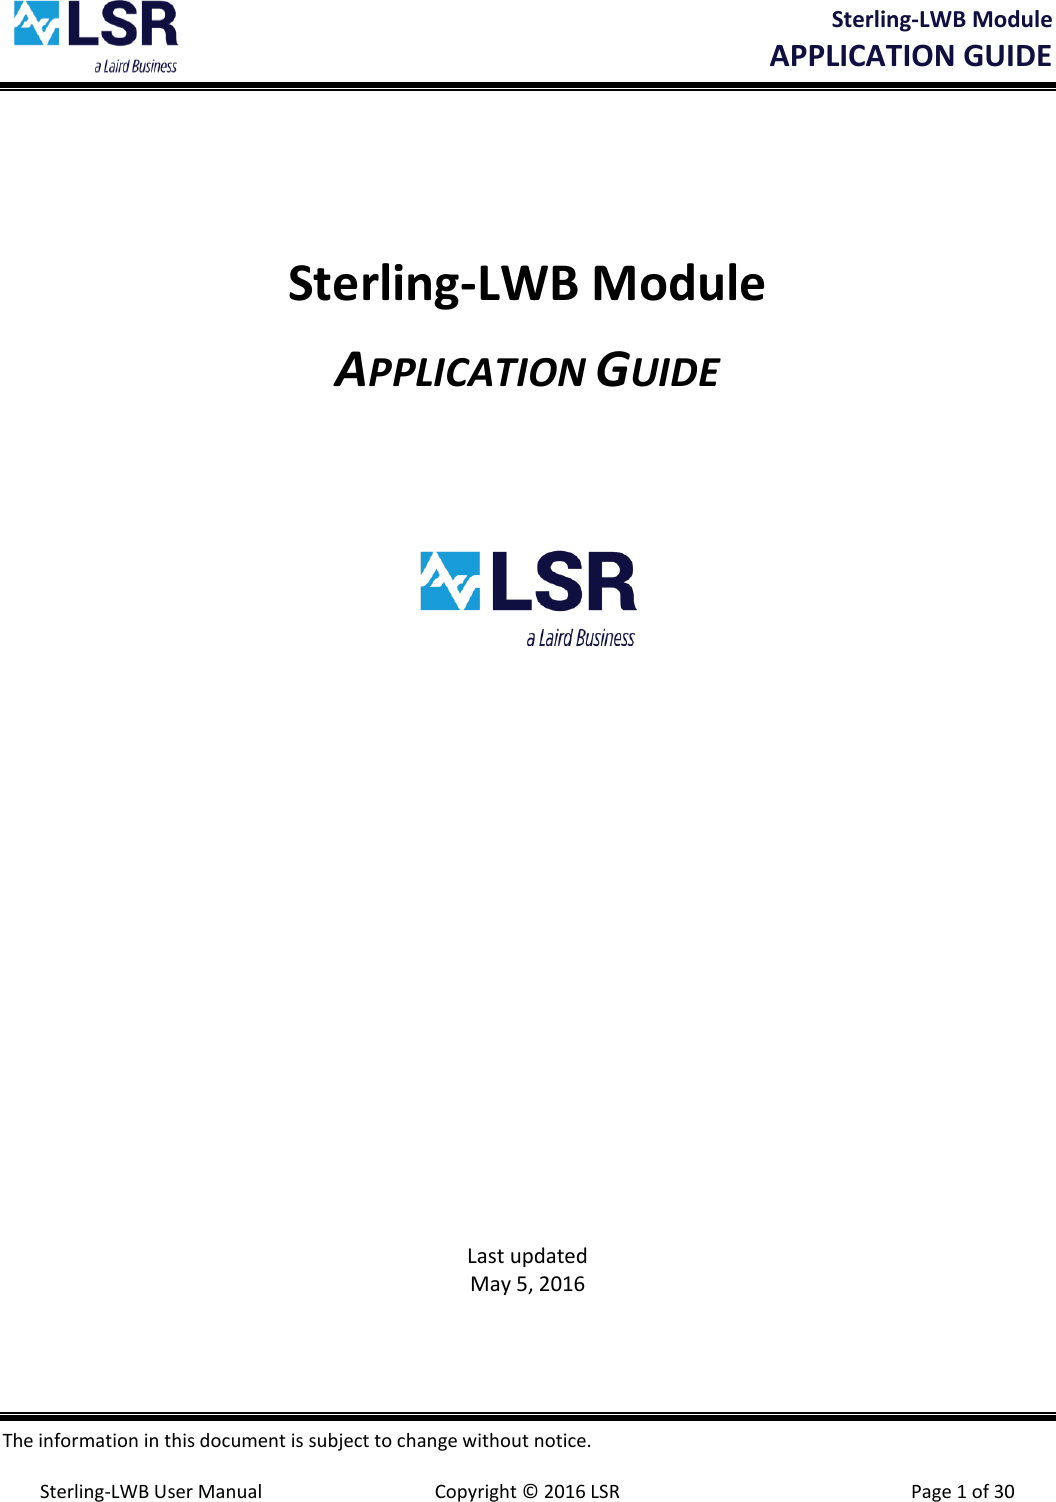  Sterling-LWB Module       APPLICATION GUIDE  The information in this document is subject to change without notice.  Sterling-LWB User Manual  Copyright © 2016 LSR  Page 1 of 30 Sterling-LWB Module APPLICATION GUIDE              Last updated May 5, 2016